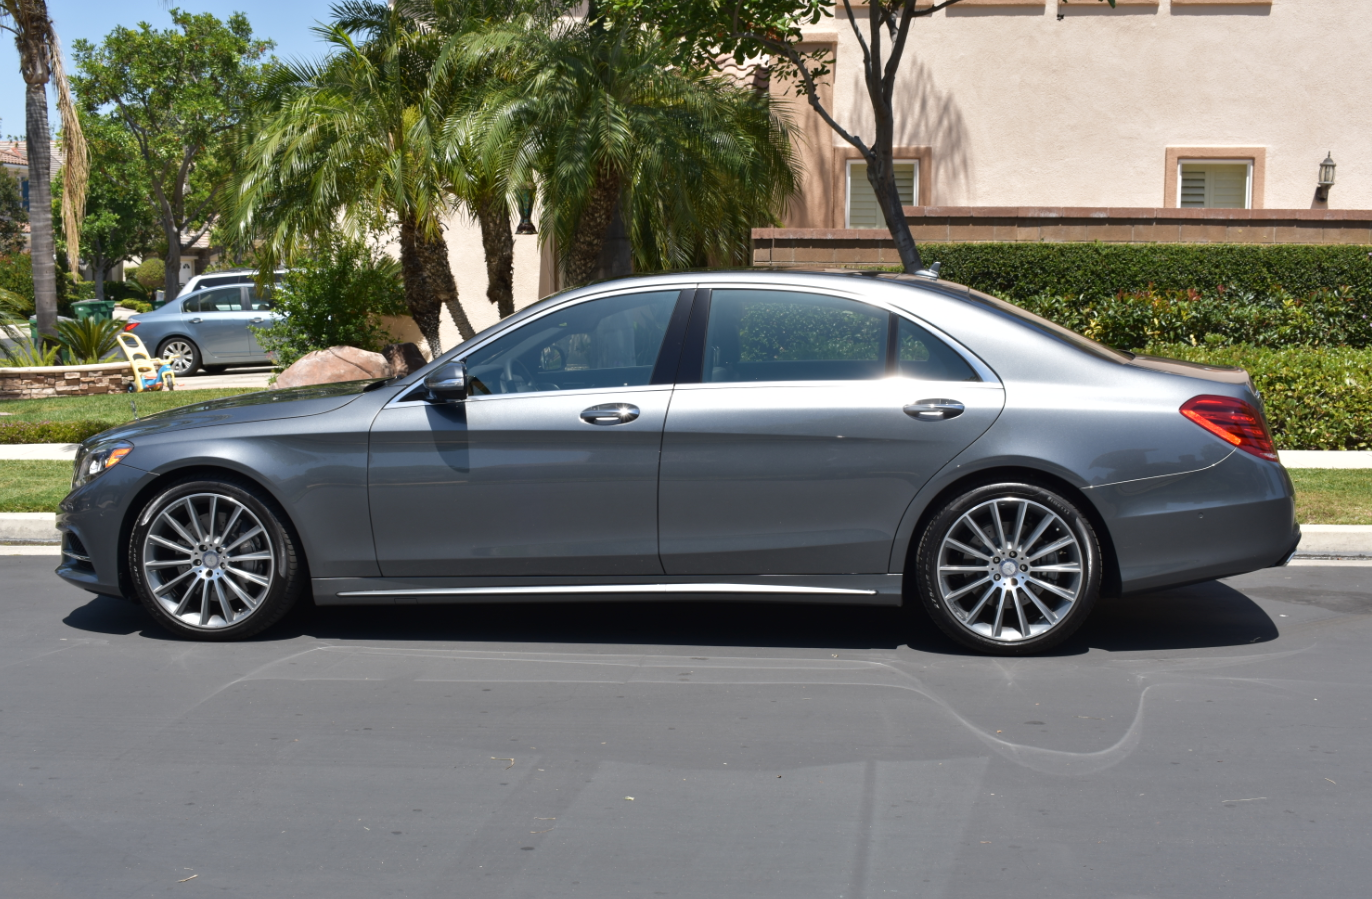 2017 Mercedes-Benz S550 - LIKE NEW 2017 MERCEDES-BENZ S550 (MOTIVATED SELLER) - Used - VIN WDDUG8CB0HA317443 - 8 cyl - 4WD - Automatic - Sedan - Gray - Irvine, CA 92620, United States